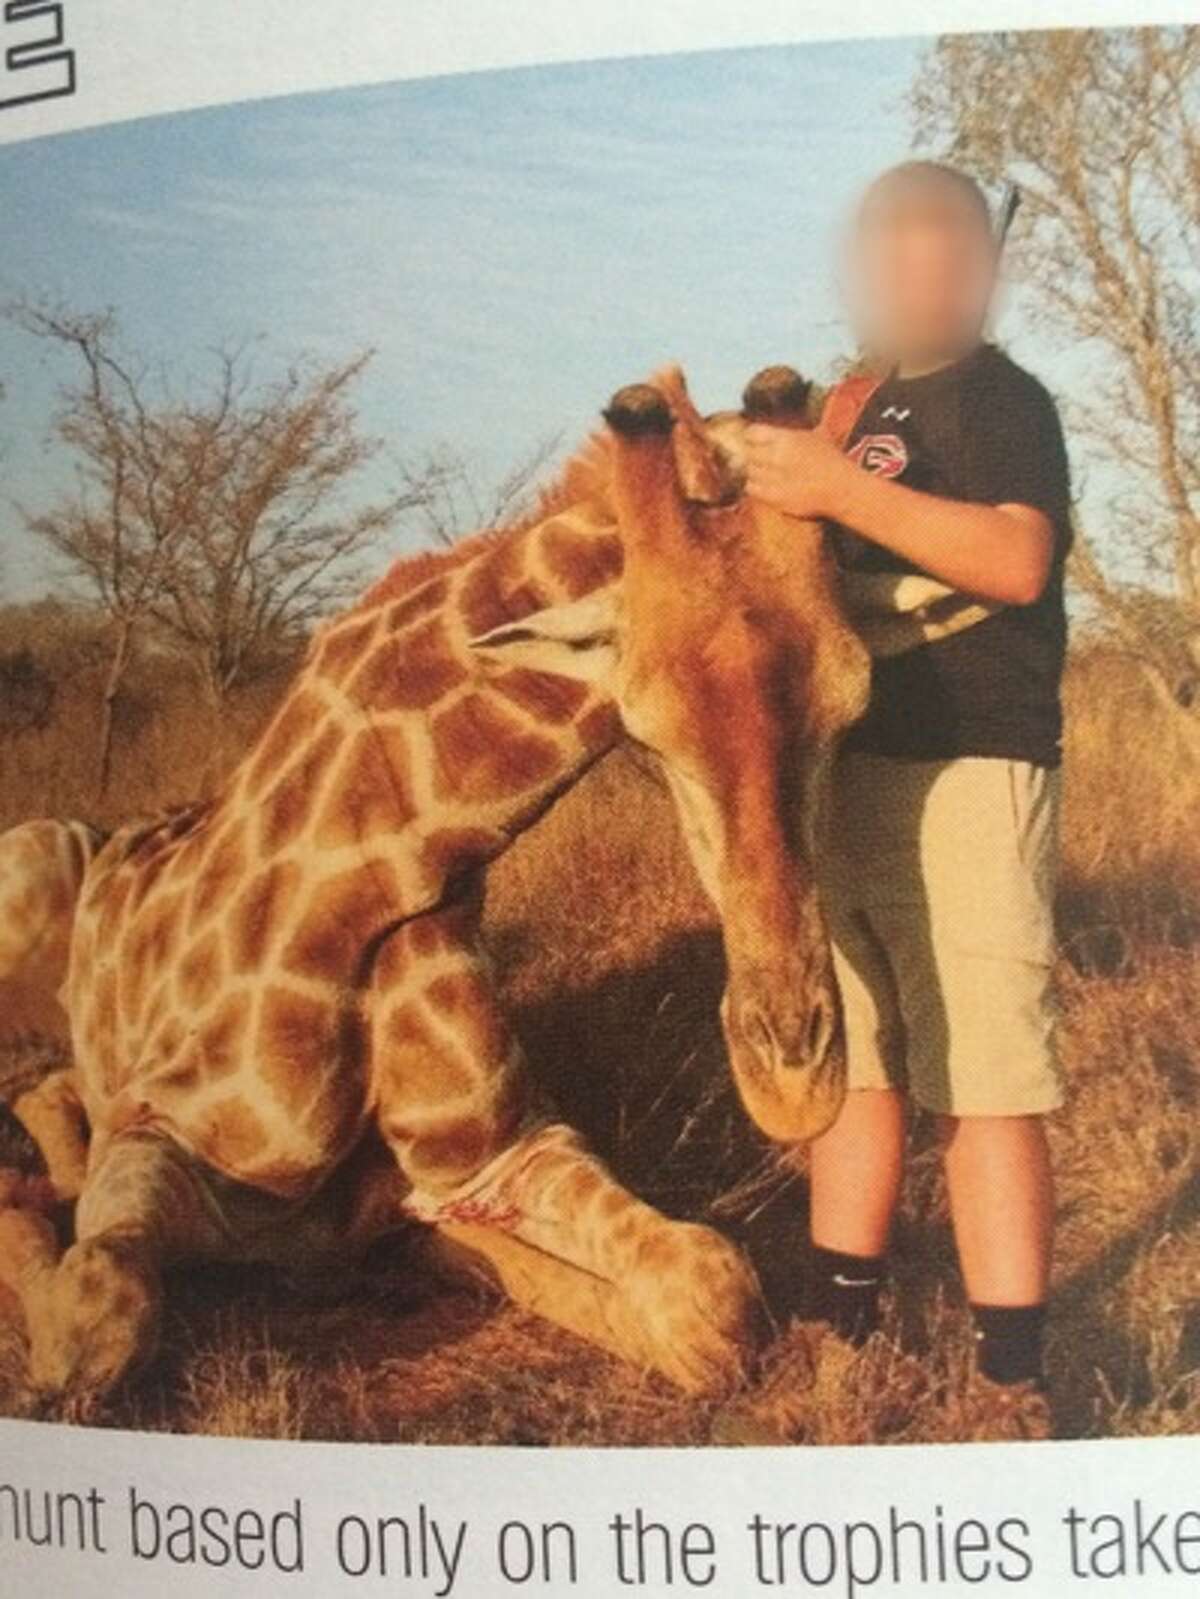 A student poses with a slain giraffe, apparently killed in a hunt, which was placed in the Guilderland High School yearbook.